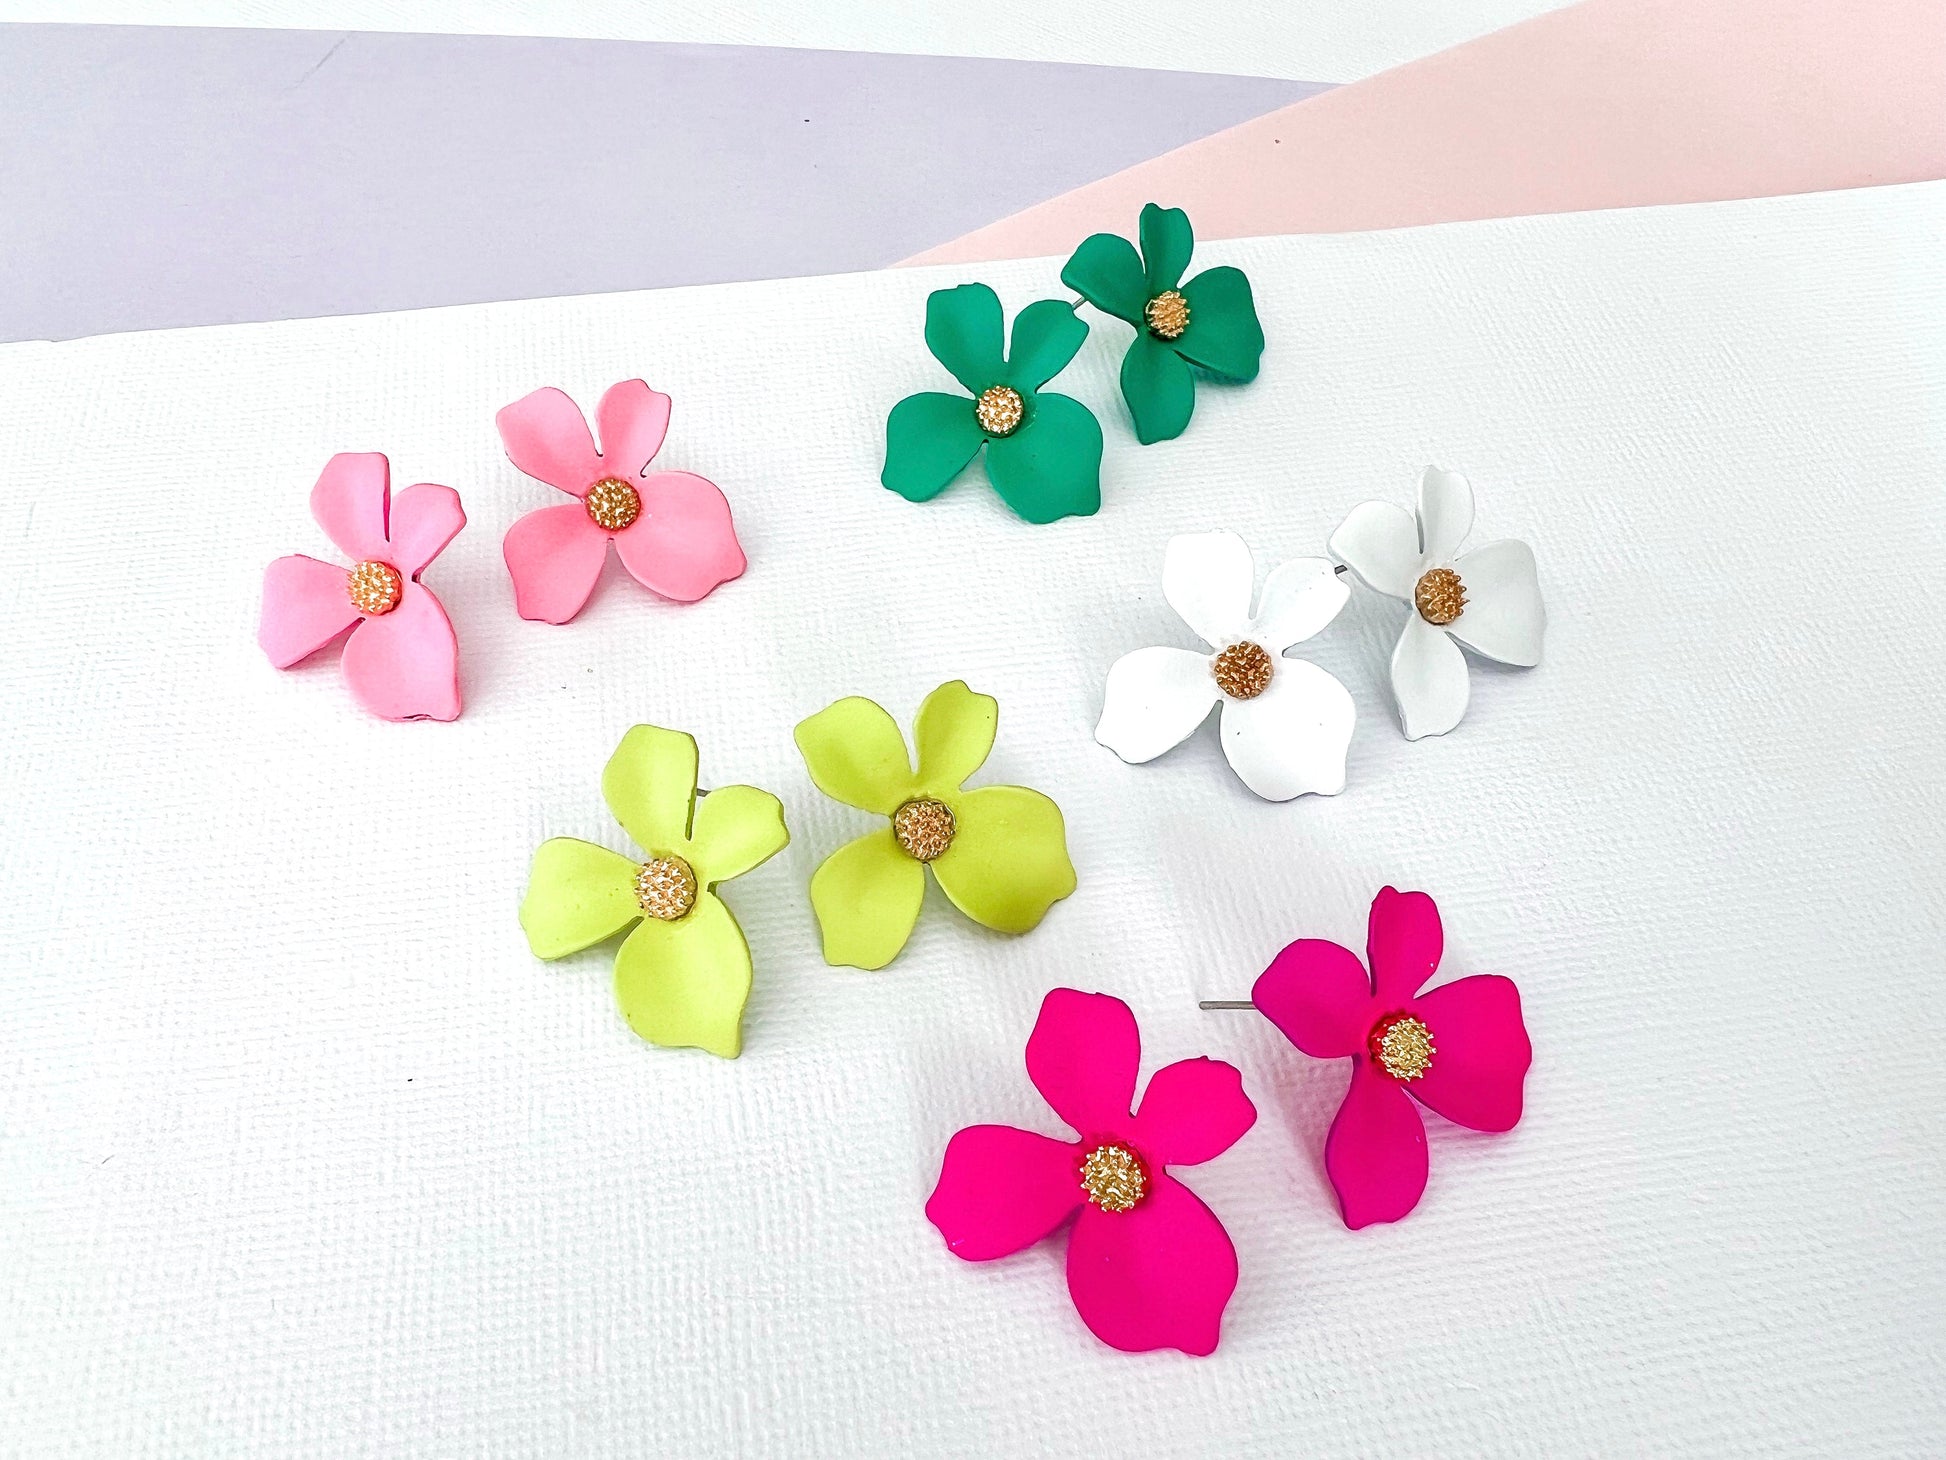 Maisie Green Flower Stud Earrings - Lacey Lou Sparkles